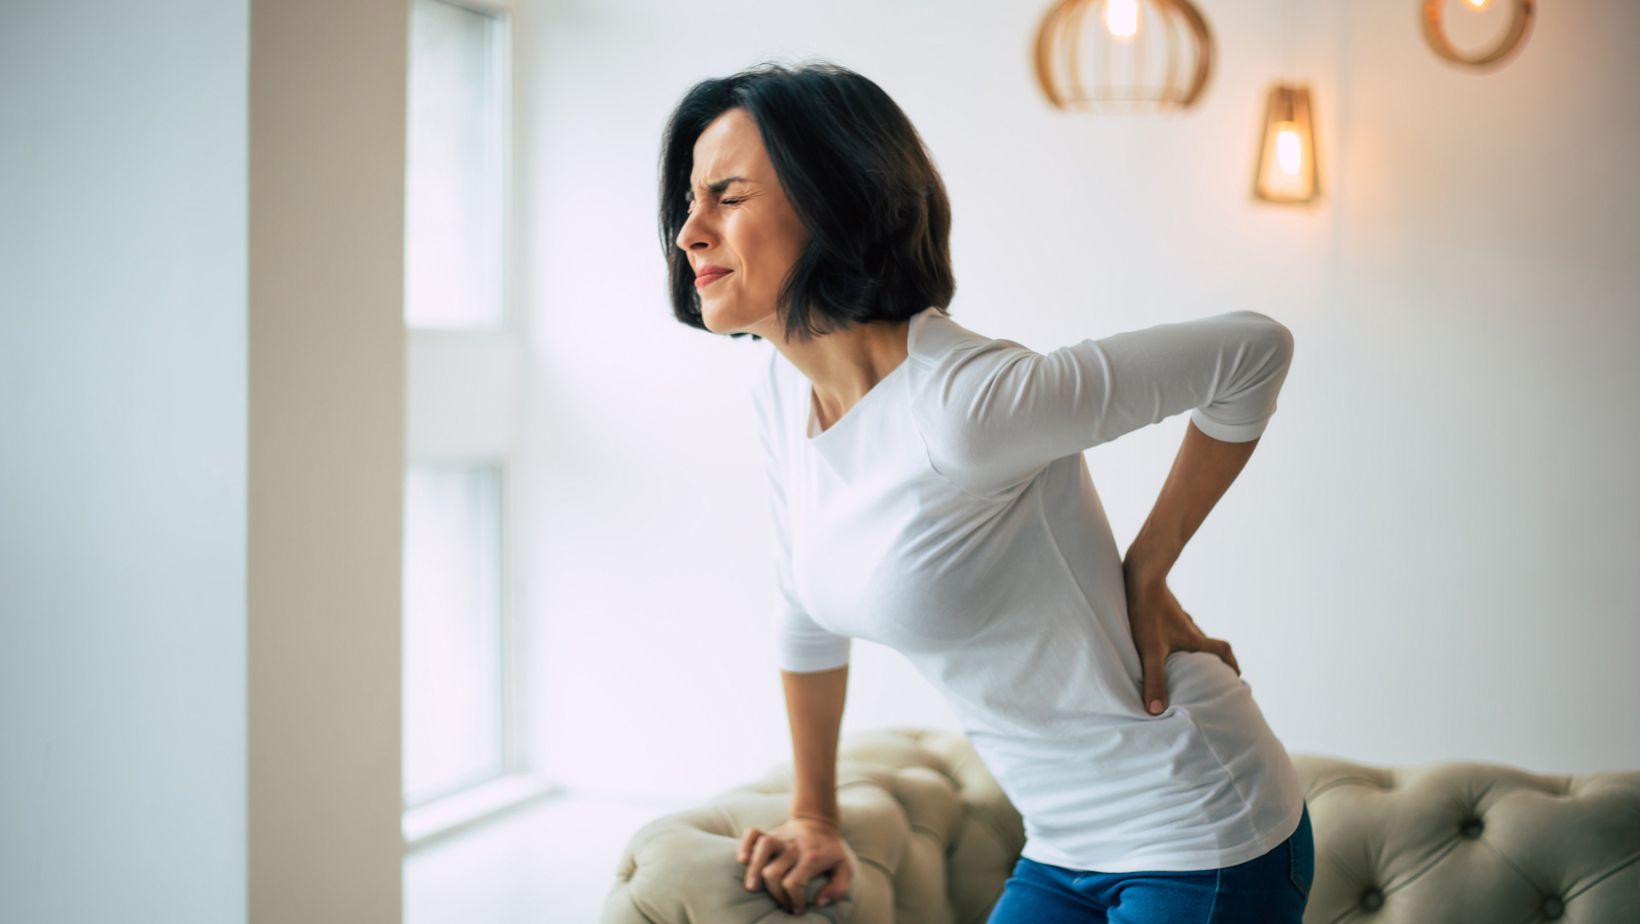 Why Women Experience Back Pain